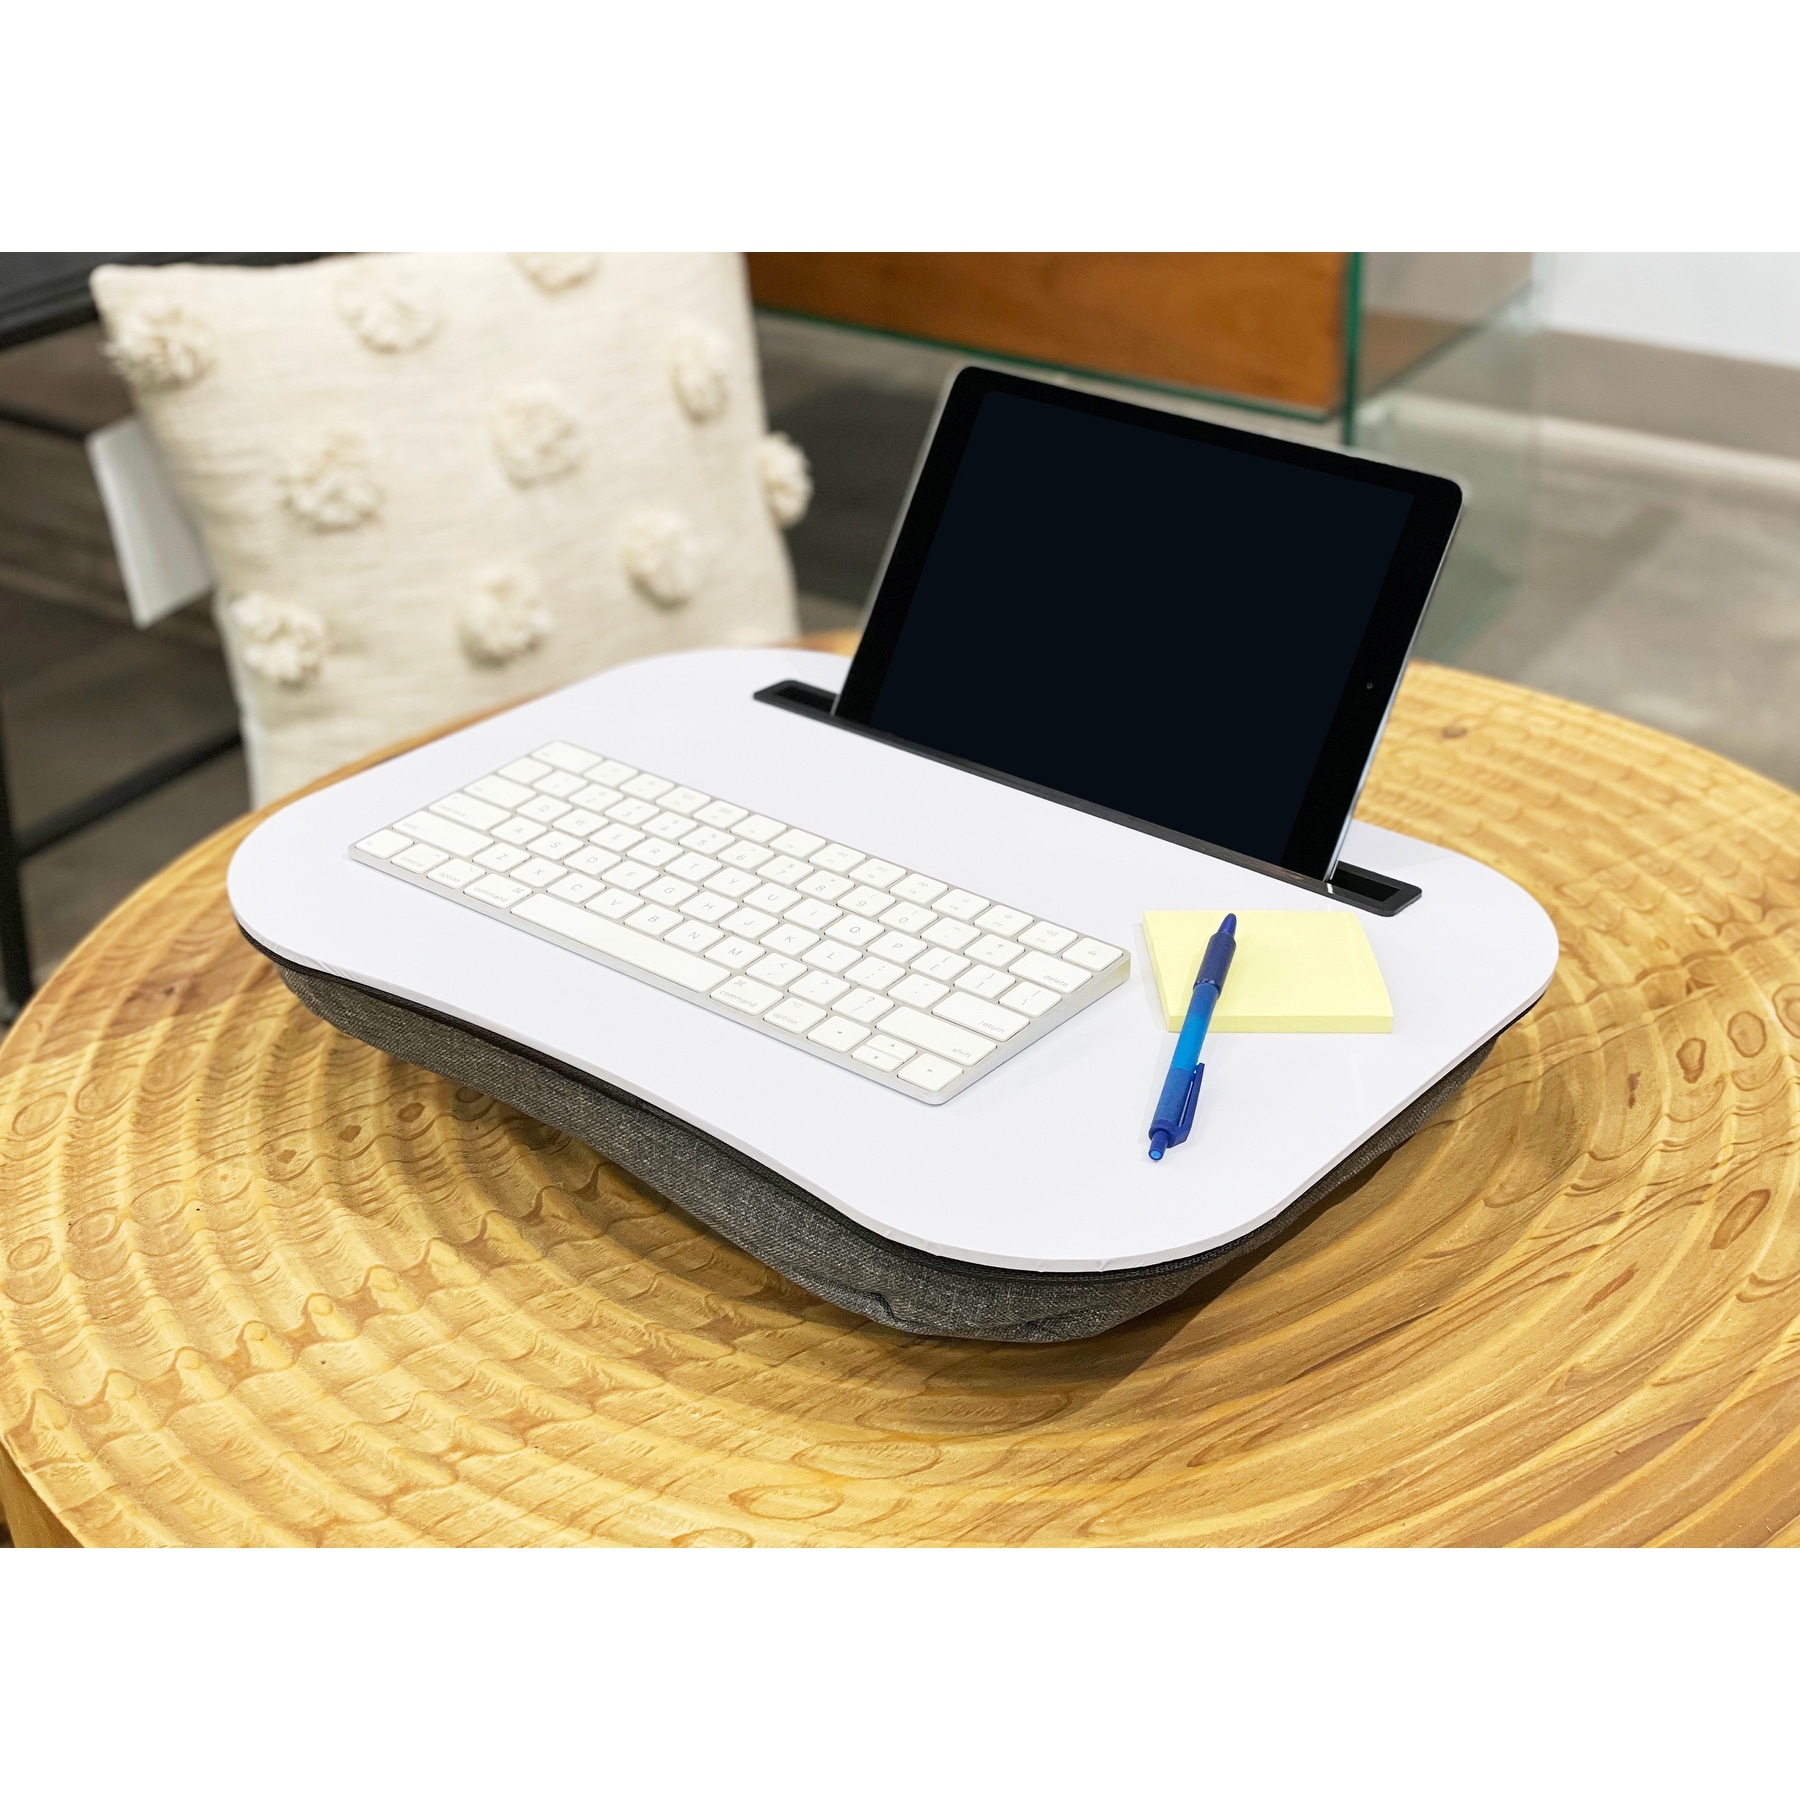 https://ak1.ostkcdn.com/images/products/is/images/direct/b56cd13ce1ff3be9be0b34a9268fd53ee15b5e8a/Rae-Dunn-Cushion-Backed-Laptop-Desk---BEE-YOU.jpg